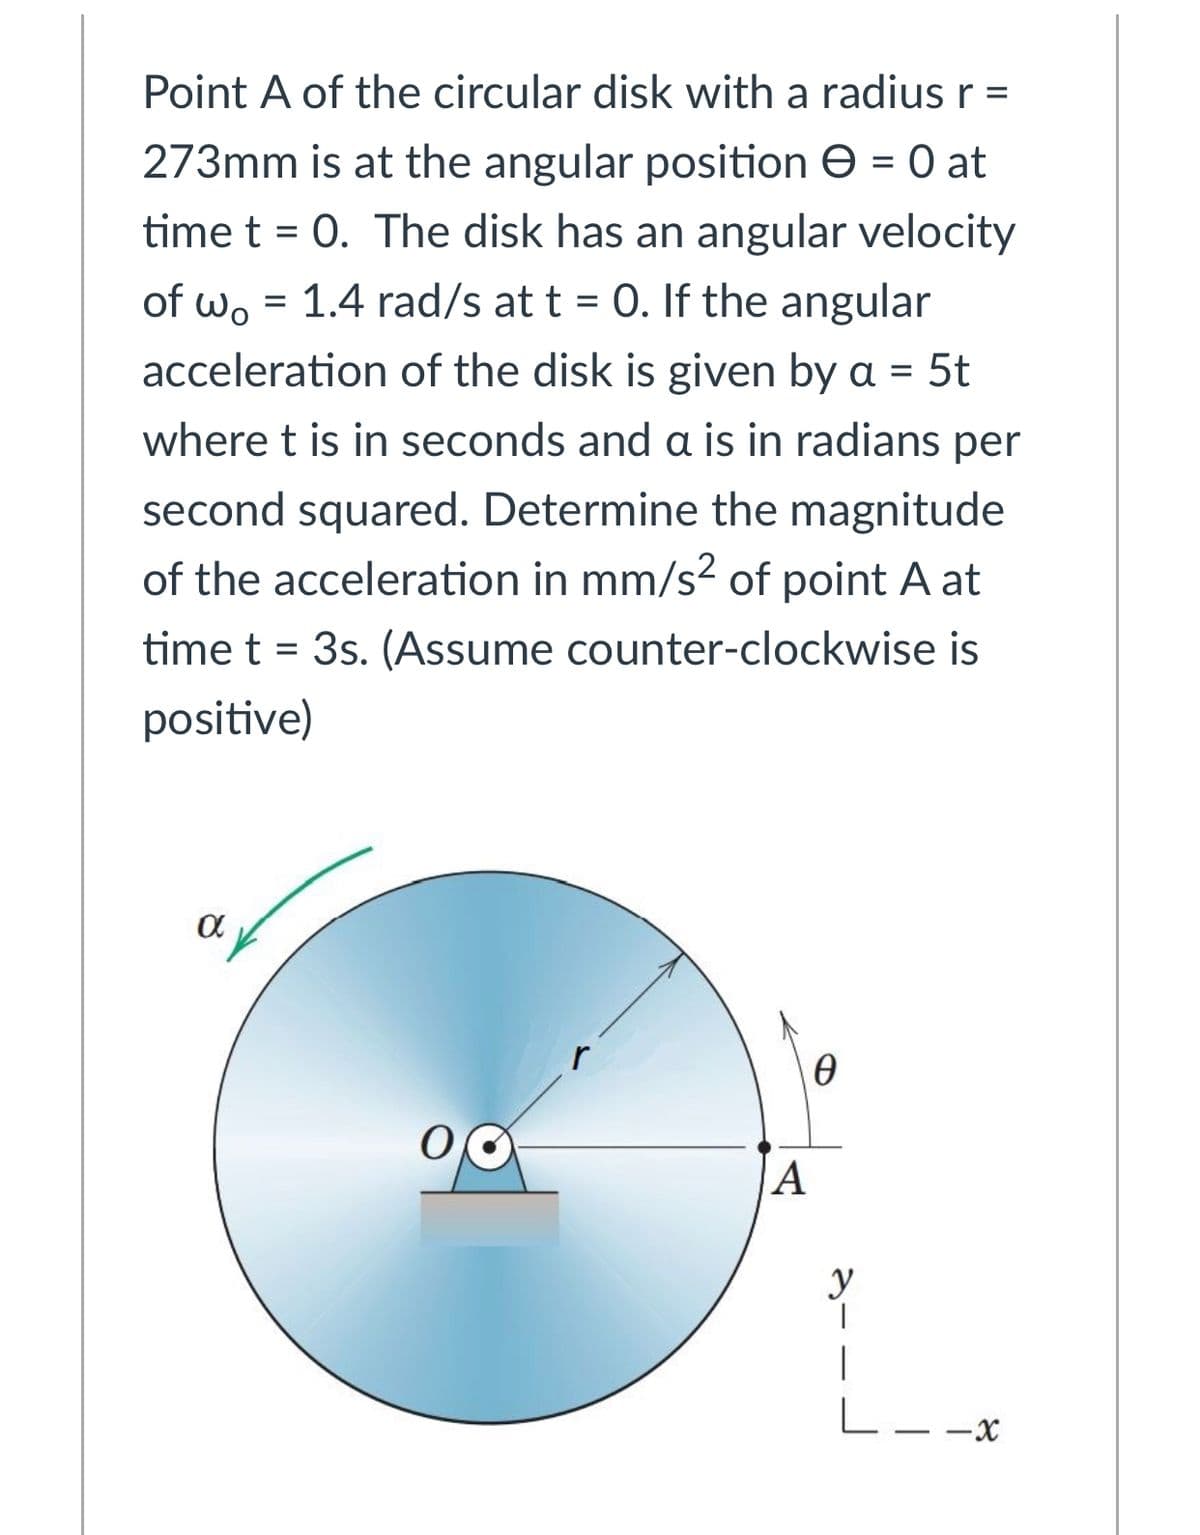 Point A of the circular disk with a radius r =
273mm is at the angular position e = 0 at
time t = 0. The disk has an angular velocity
of wo = 1.4 rad/s at t = 0. If the angular
%3D
acceleration of the disk is given by a = 5t
where t is in seconds and a is in radians per
second squared. Determine the magnitude
of the acceleration in mm/s2 of point A at
time t = 3s. (Assume counter-clockwise is
positive)
r
A
y
L- -X
